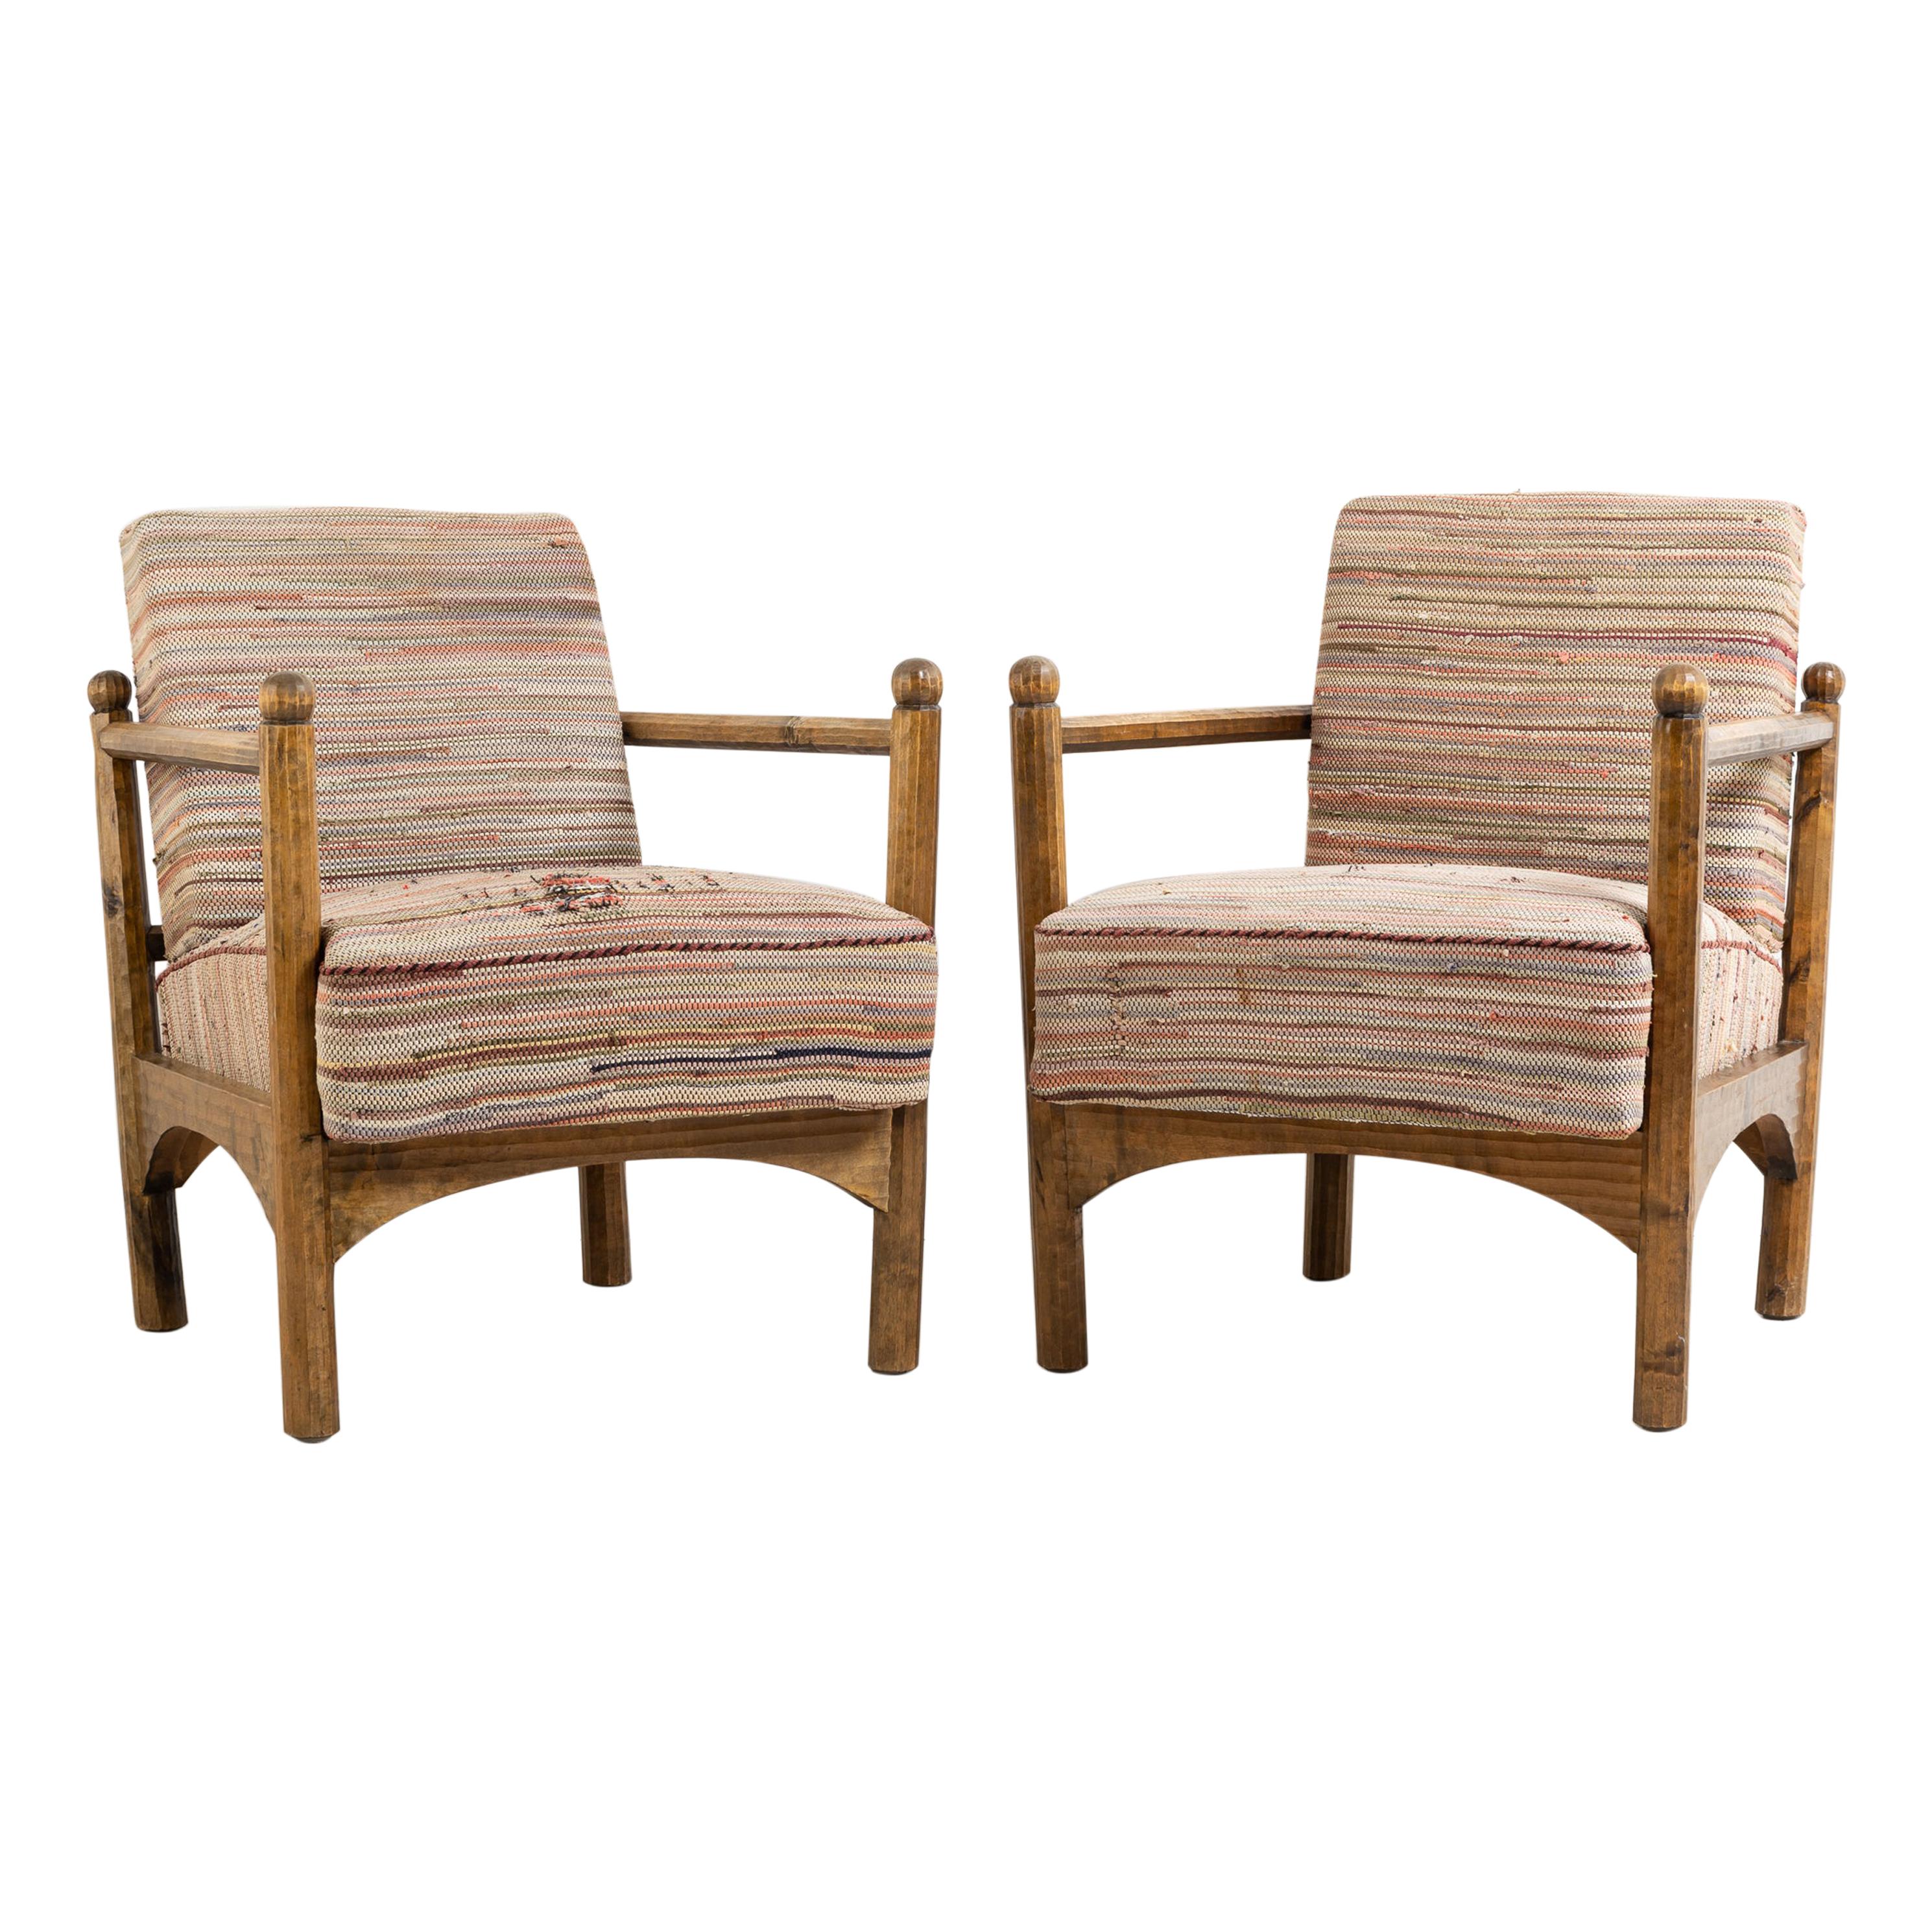 Unusual Armchairs Swedish Grace from the Early 20th Century